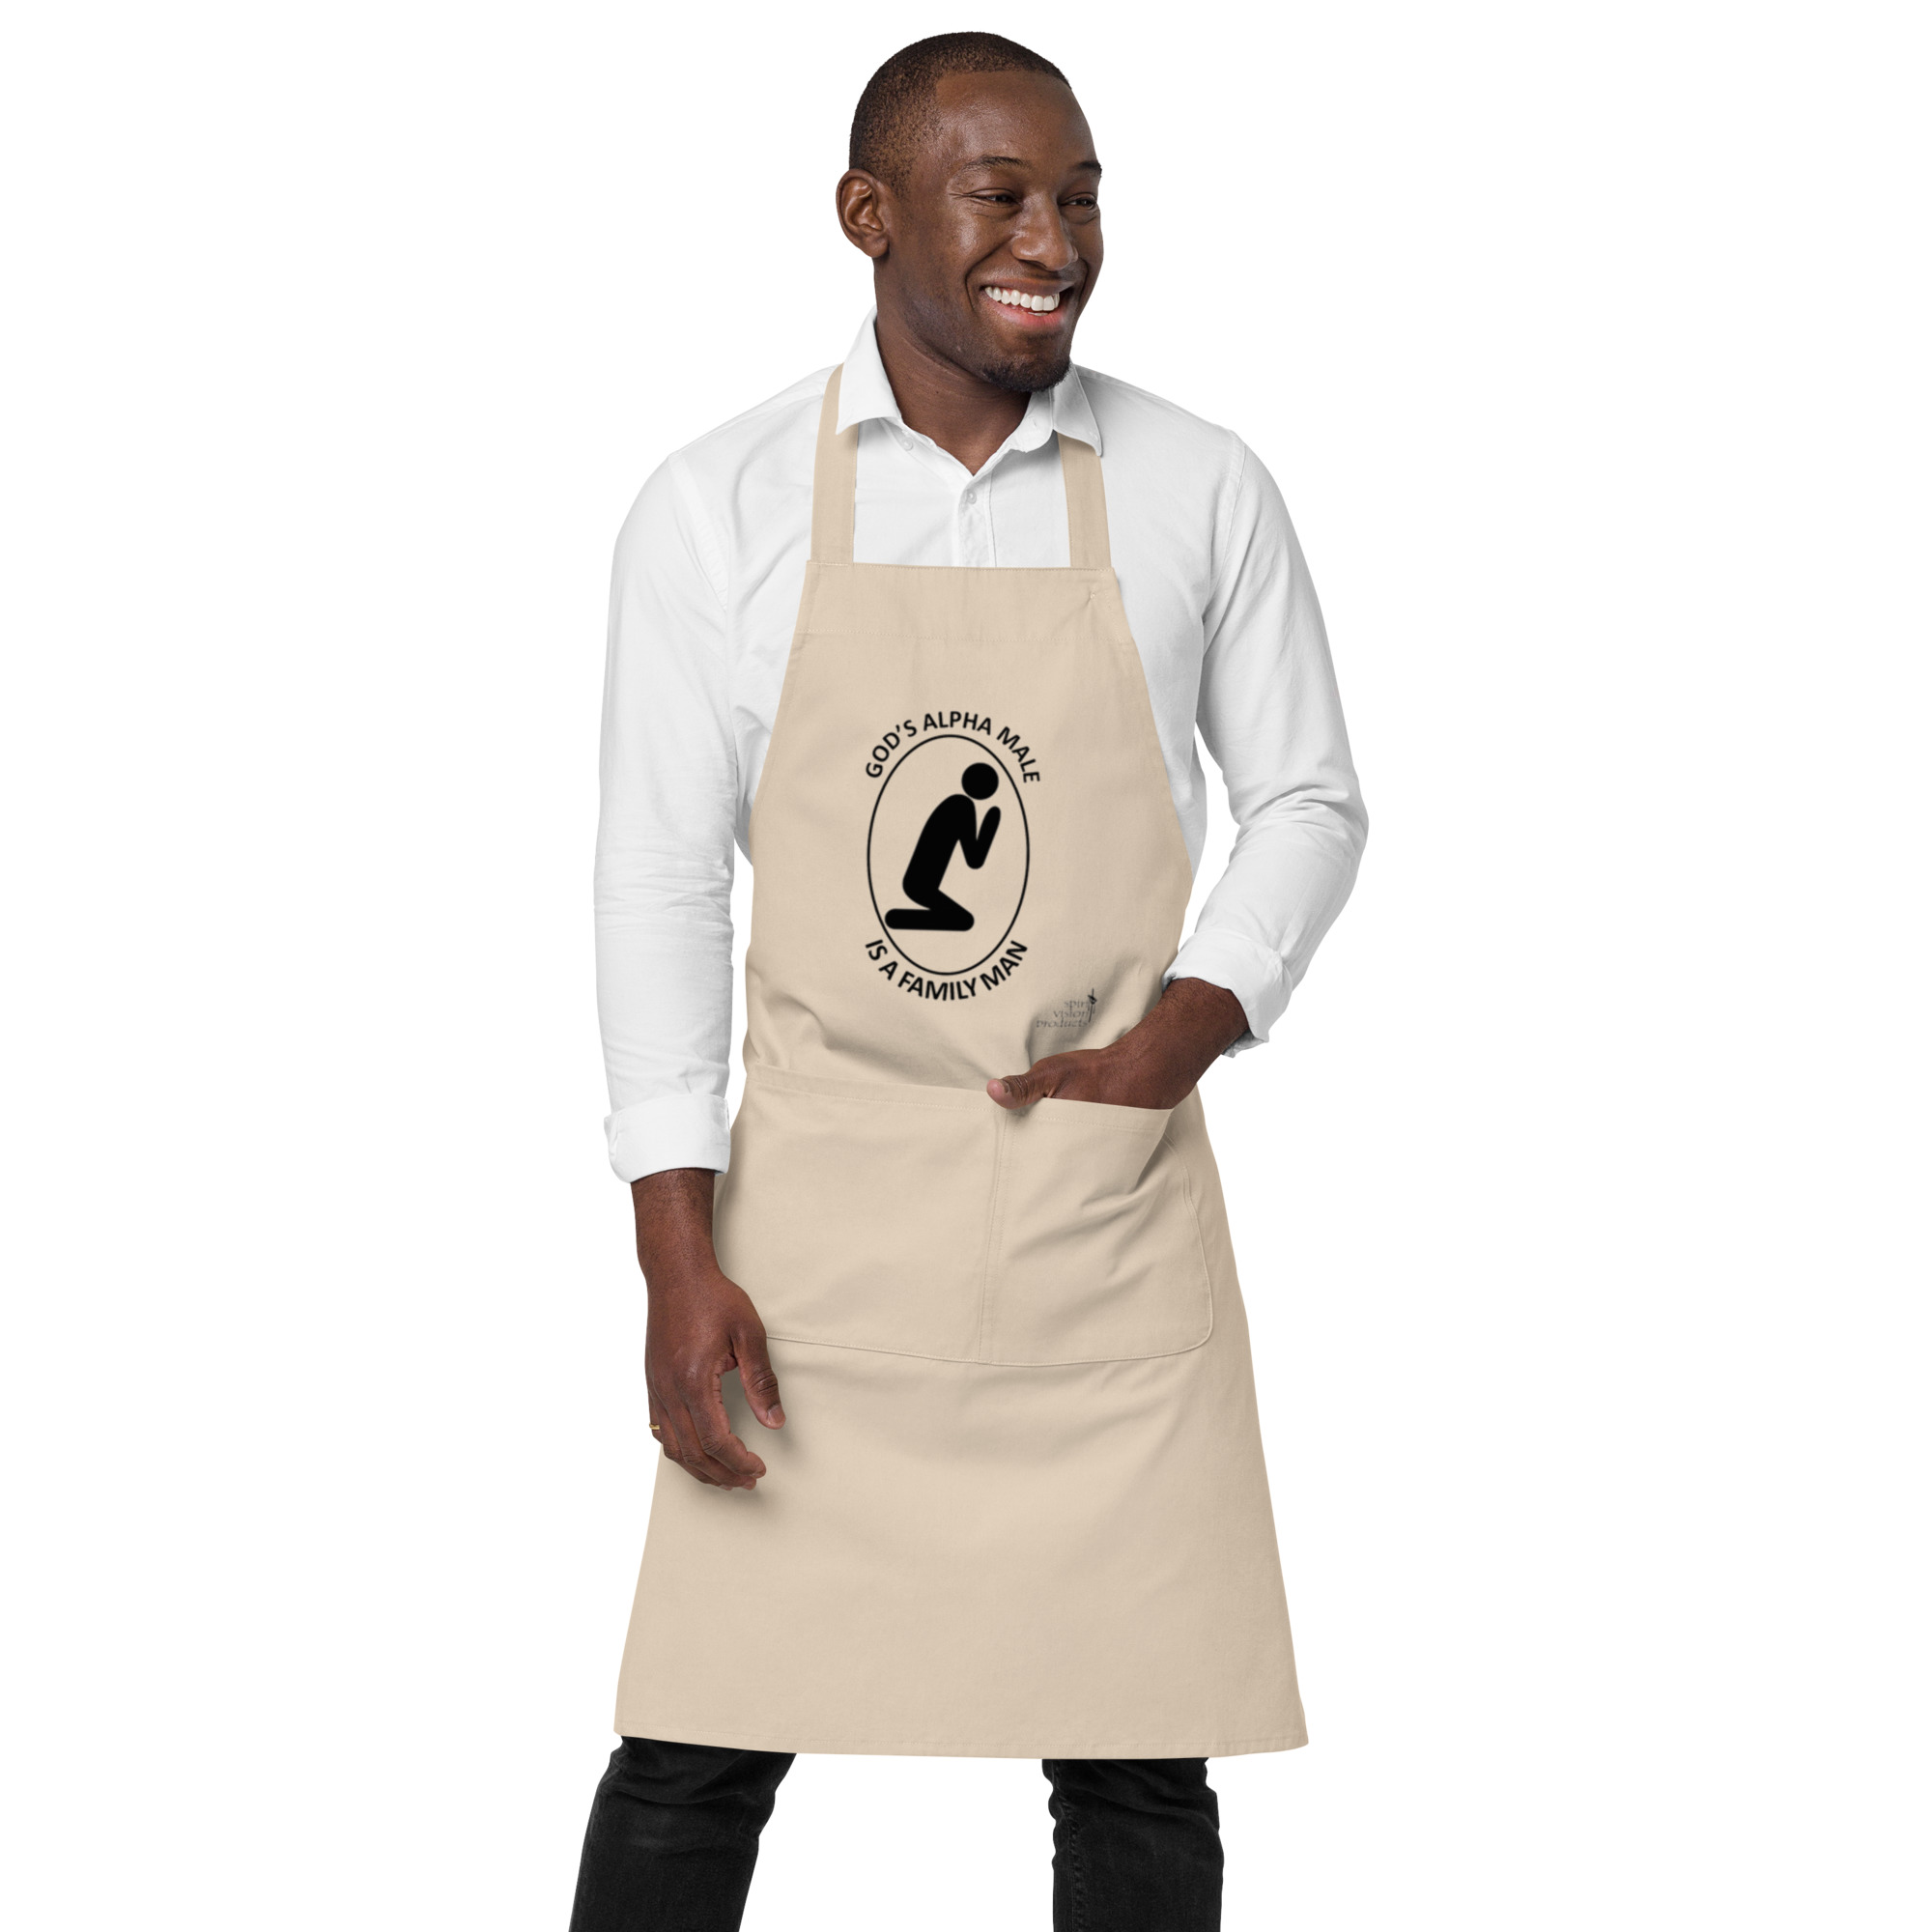 Grilling and Cooking Apron. Tan. God’s Alpha Male – Gods Alpha Male